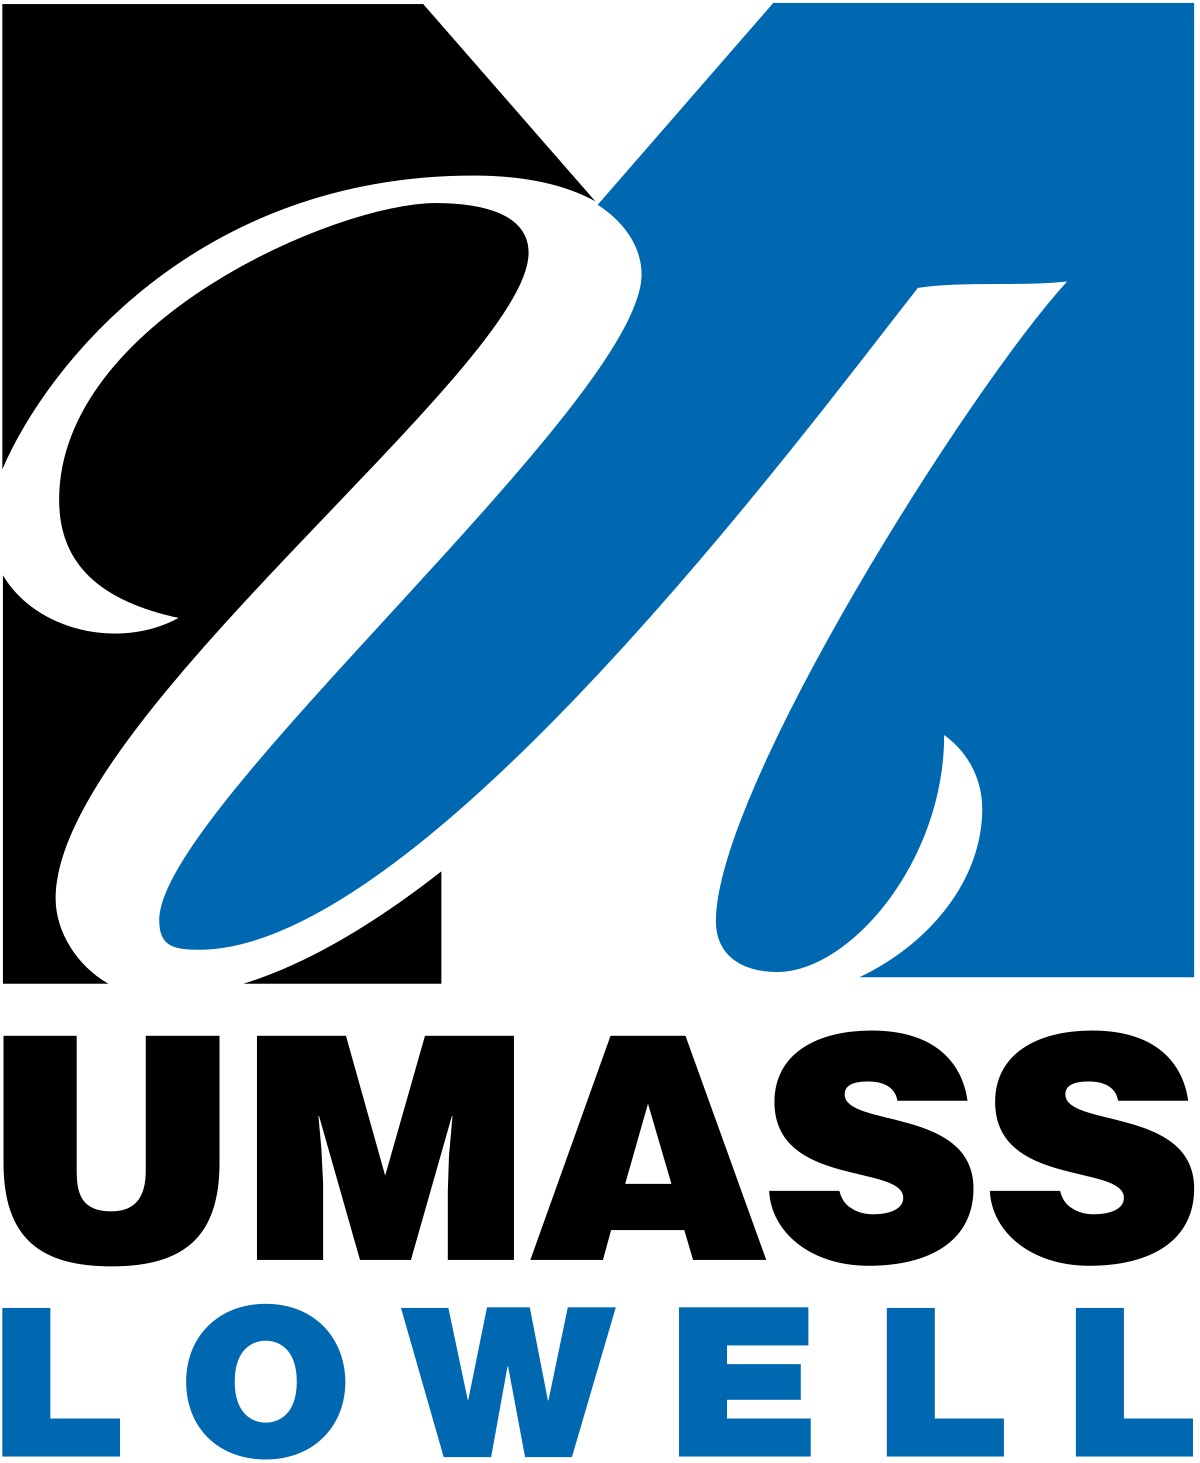 Winslow resident named to UMass Lowell dean's list